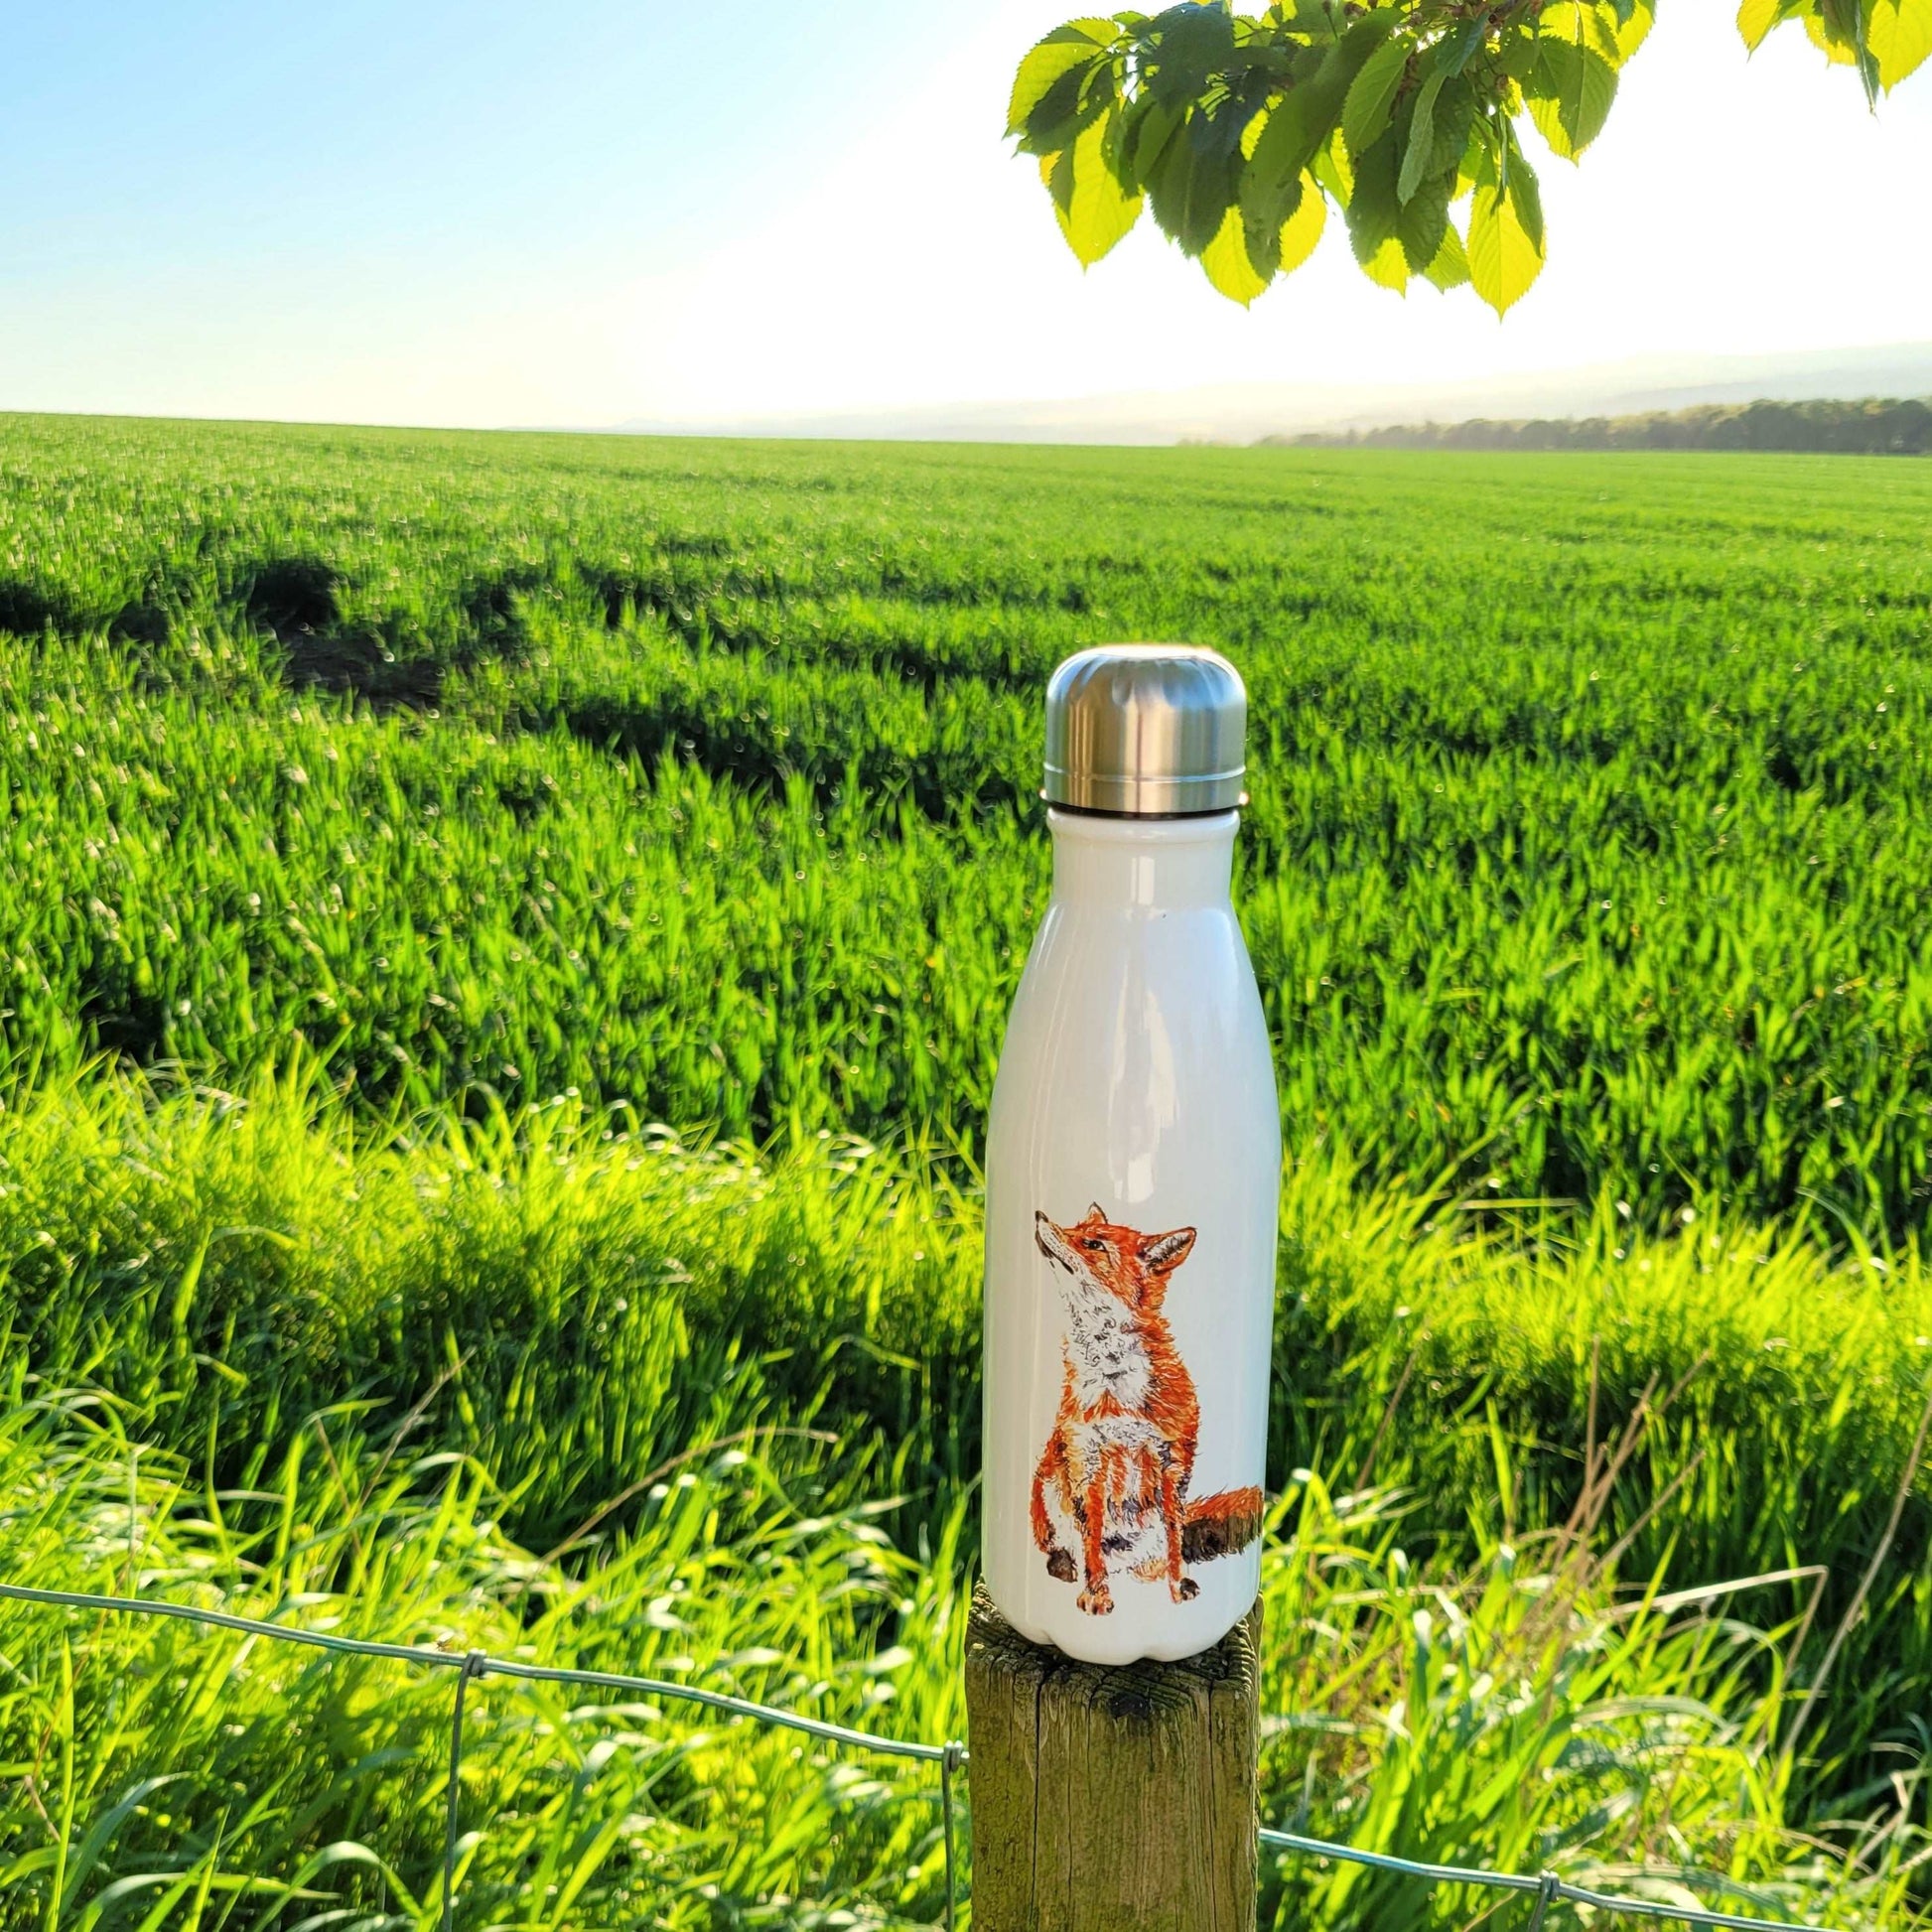 Fox insulated water bottle - cold and hot drinks